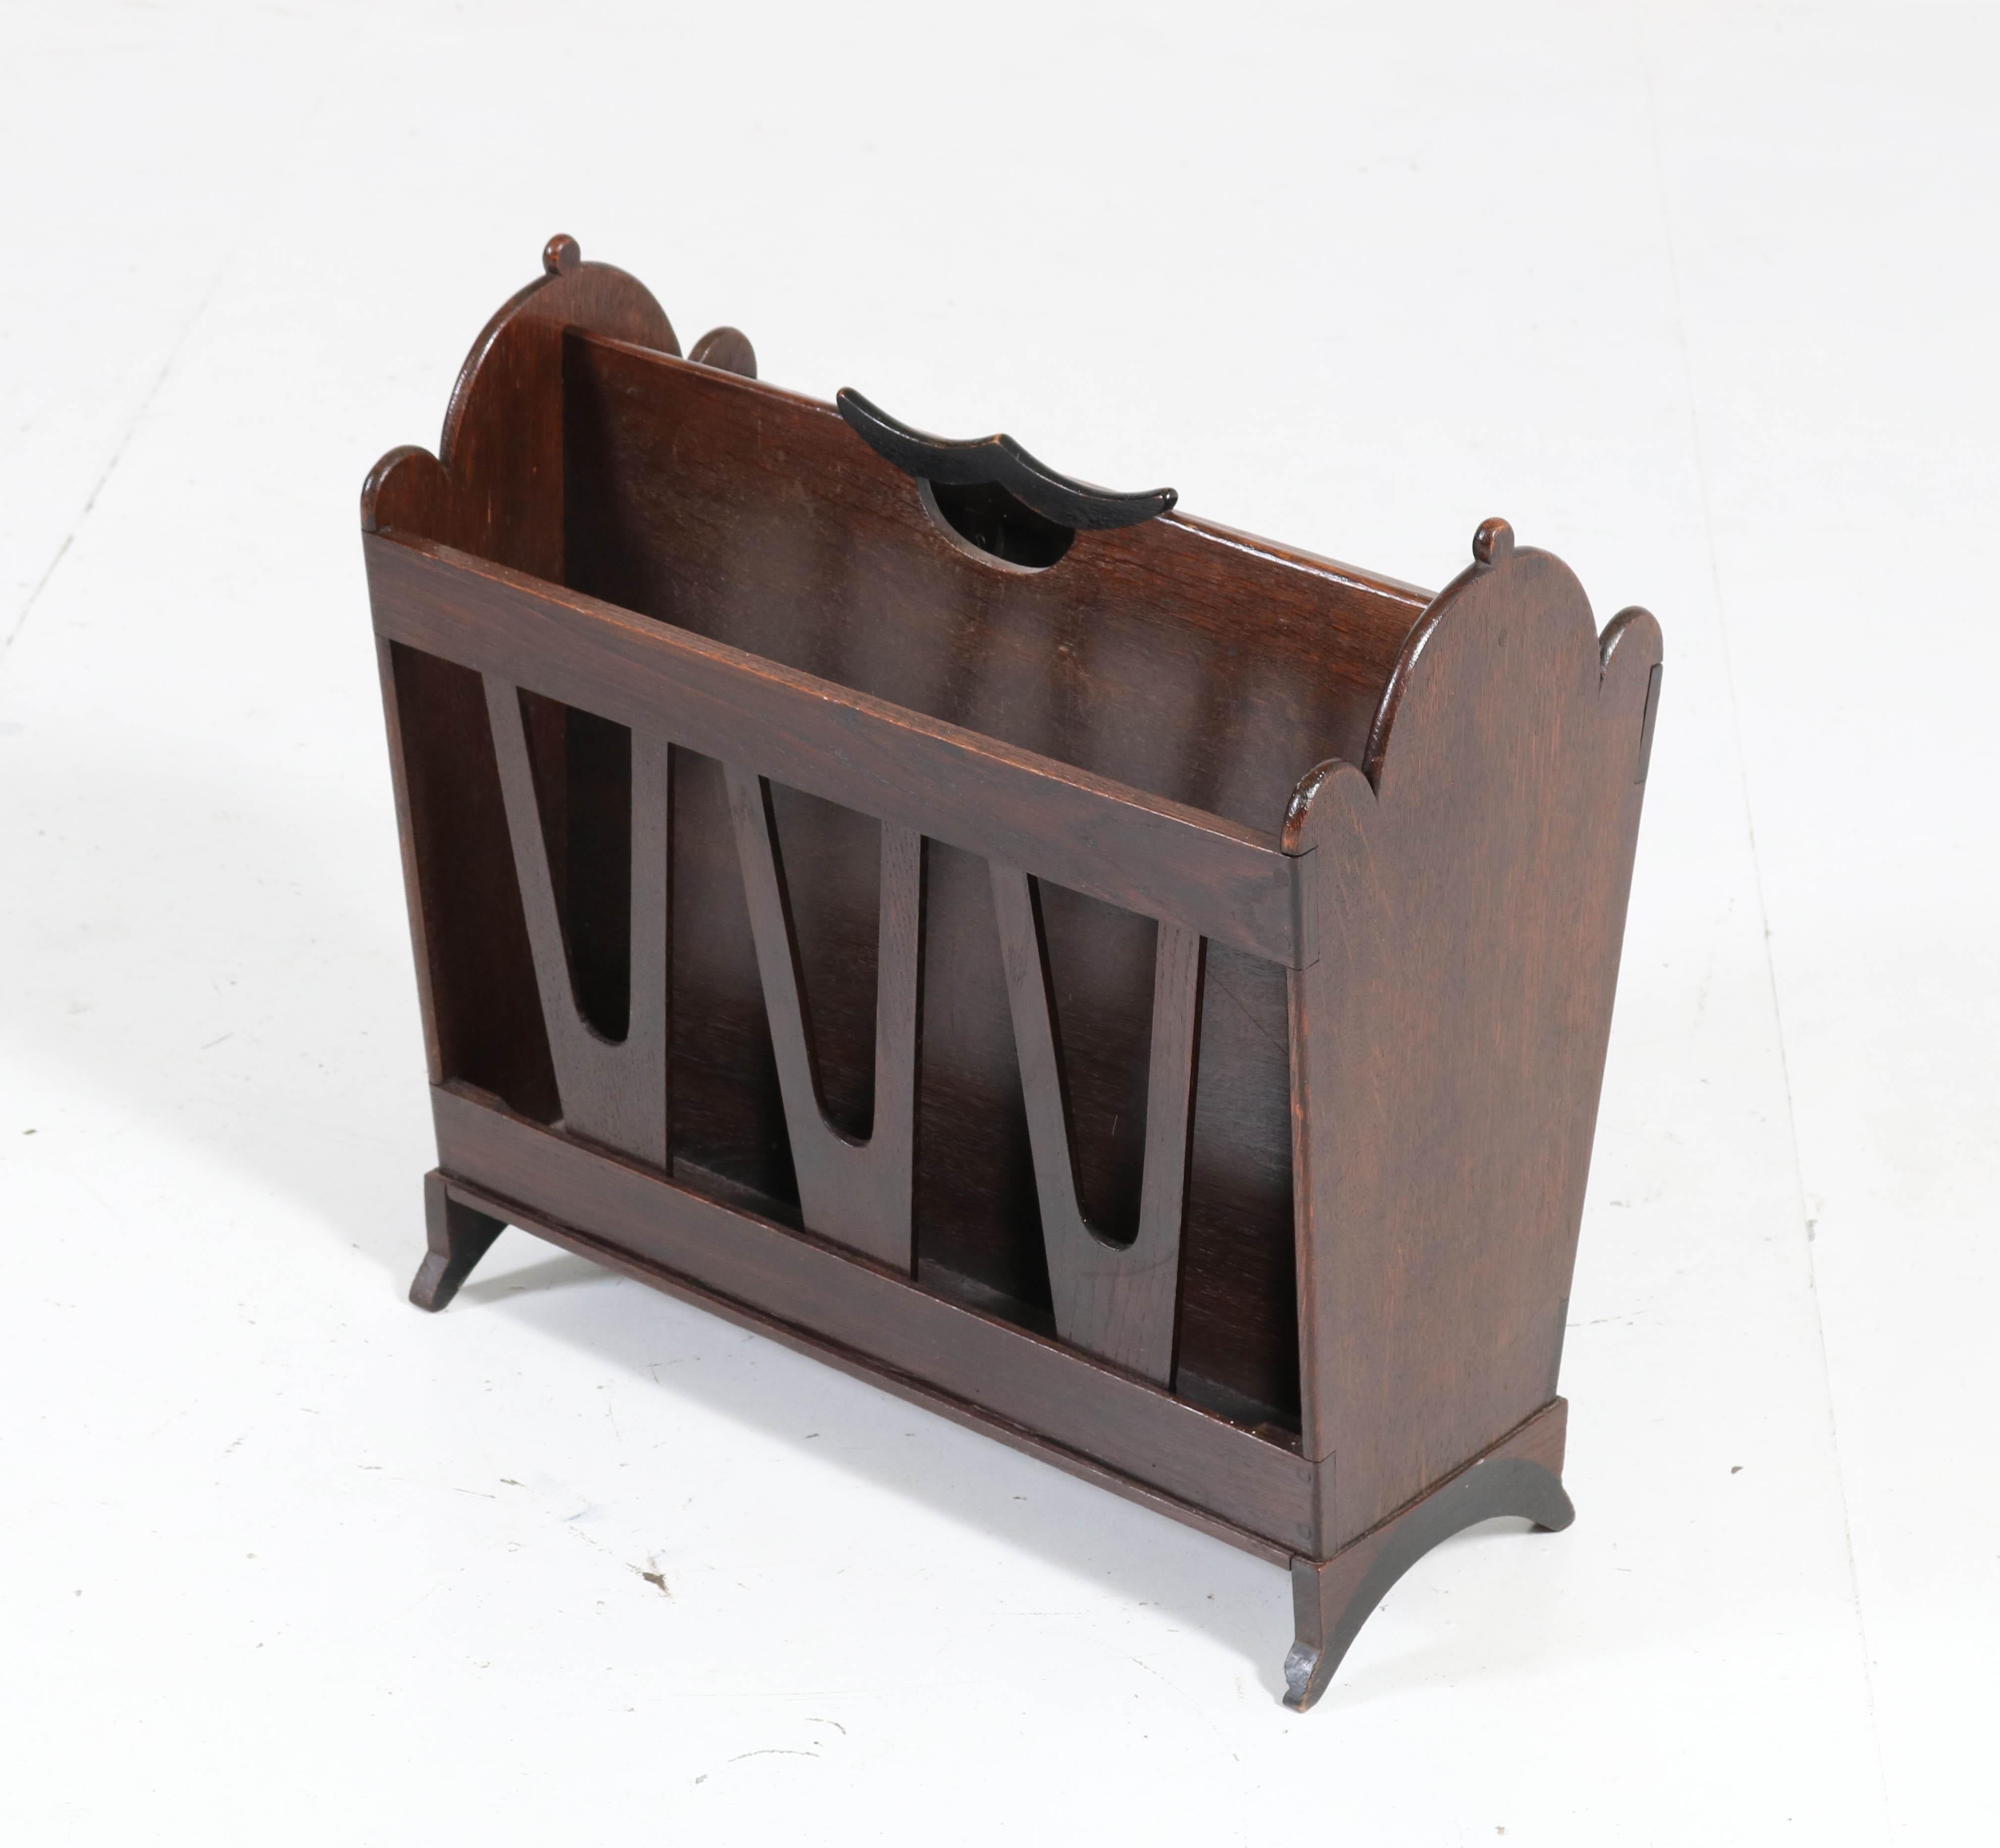 Wonderful and rare Art Deco Amsterdam School magazine rack.
Design by Willem Penaat for Metz & Co. Amsterdam.
Striking Dutch design from the 1920s.
Solid oak with original black lacquered details.
In very good original condition with minor wear